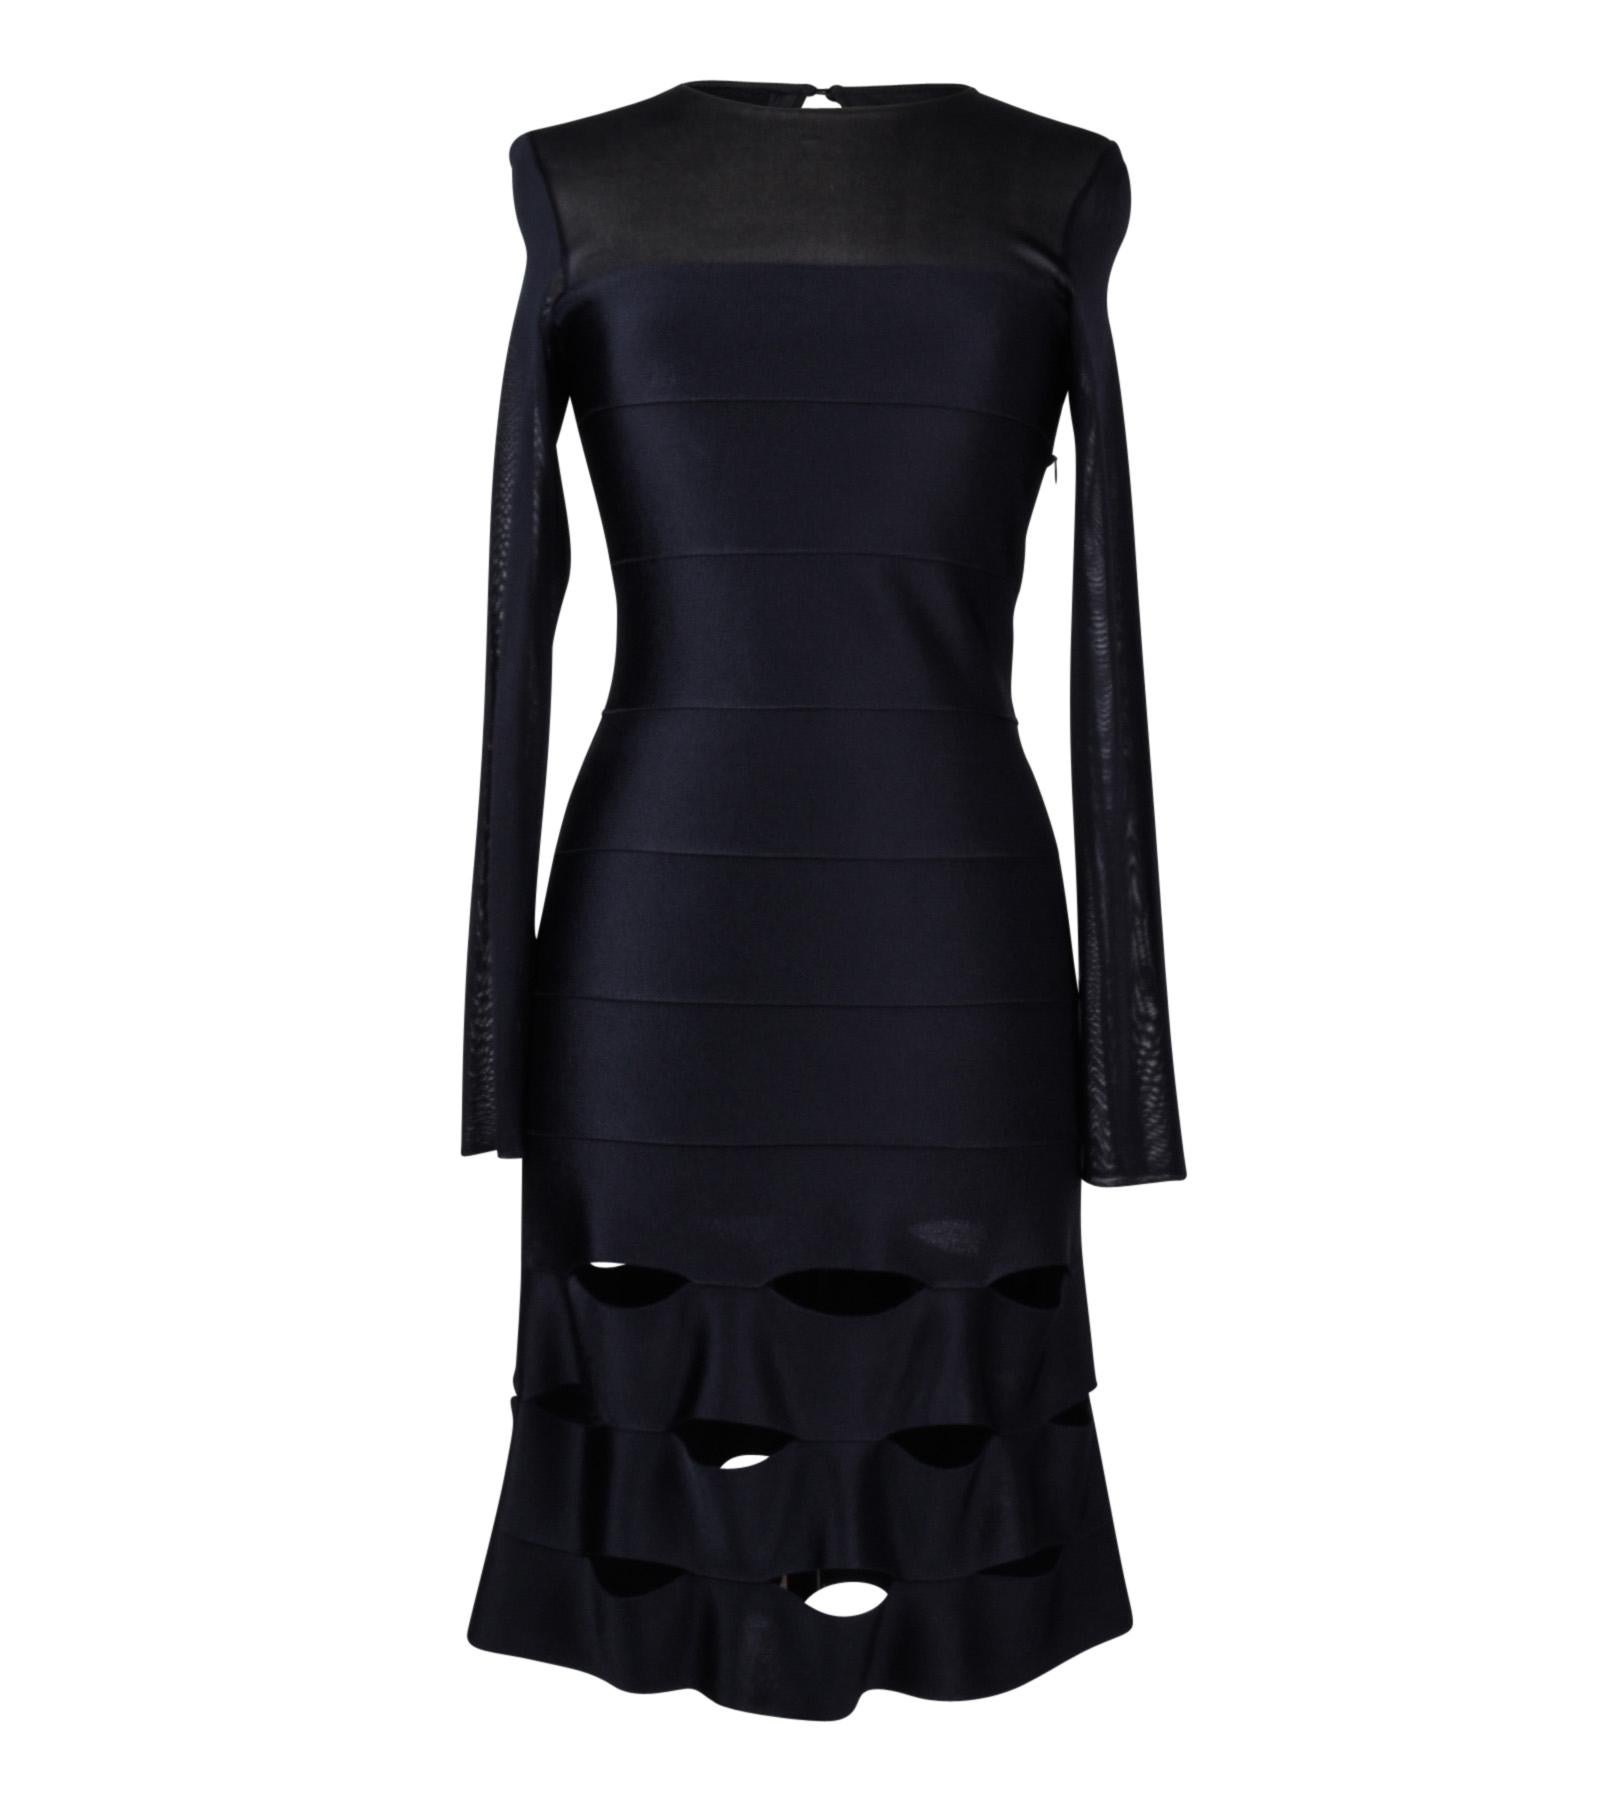 Guaranteed authentic Christian Dior mesh and bandage black dress. 
Mesh panel extends from bust line to neck.
Lower portion has open bandage strips. 
Long mesh sleeves.    
Comes with detachable black translucent slip.
Fabric is viscose and lycra 